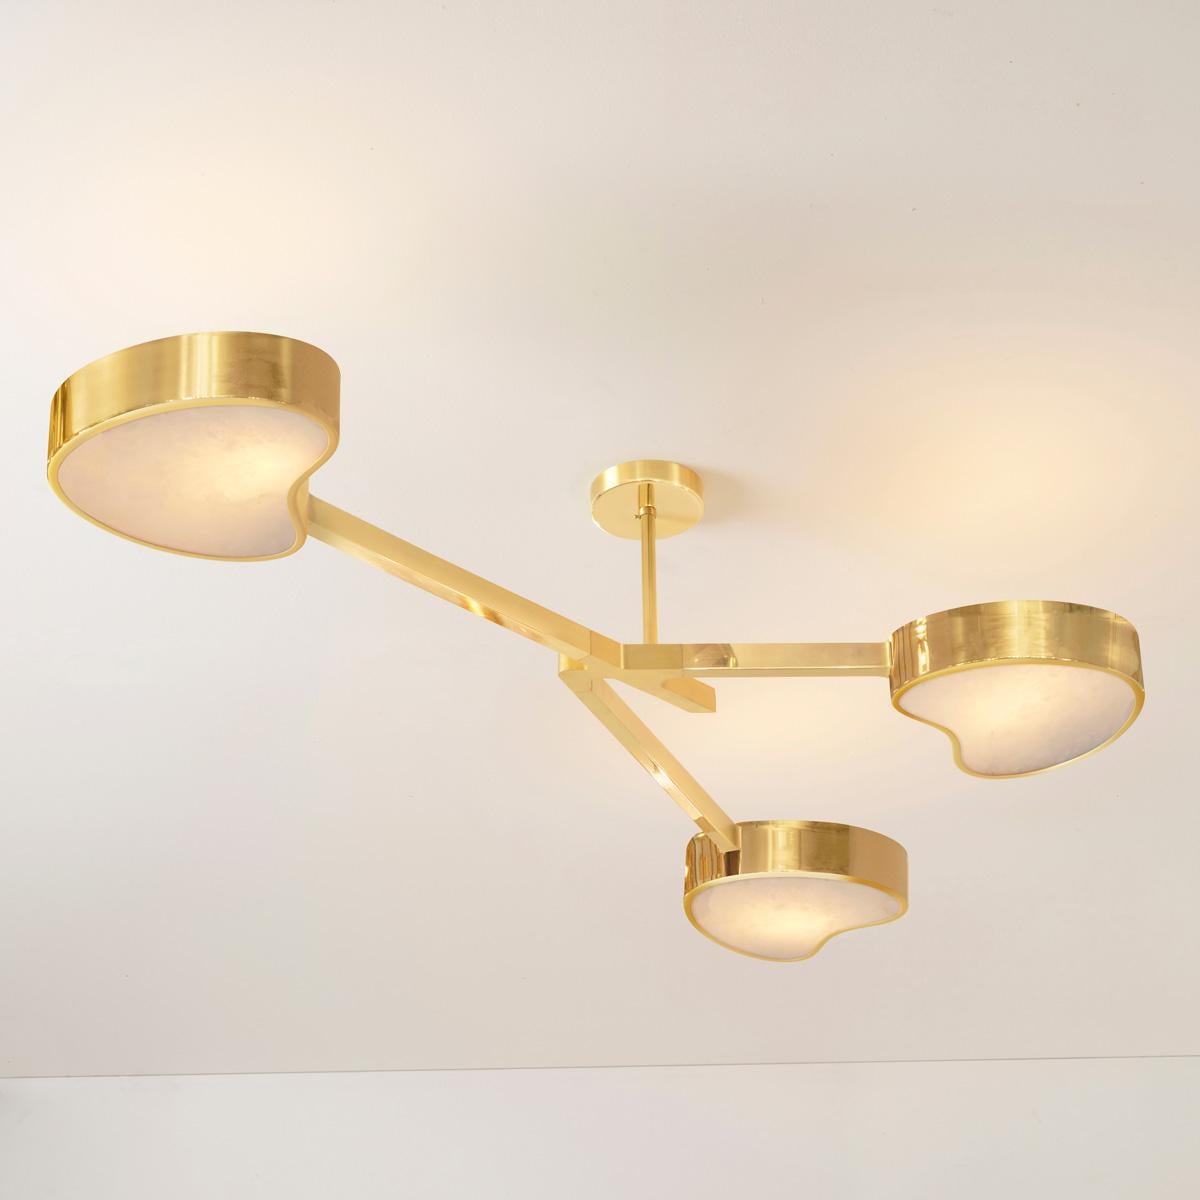 Contemporary Cuore N.3 Ceiling Light by Gaspare Asaro. Bronze Finish For Sale